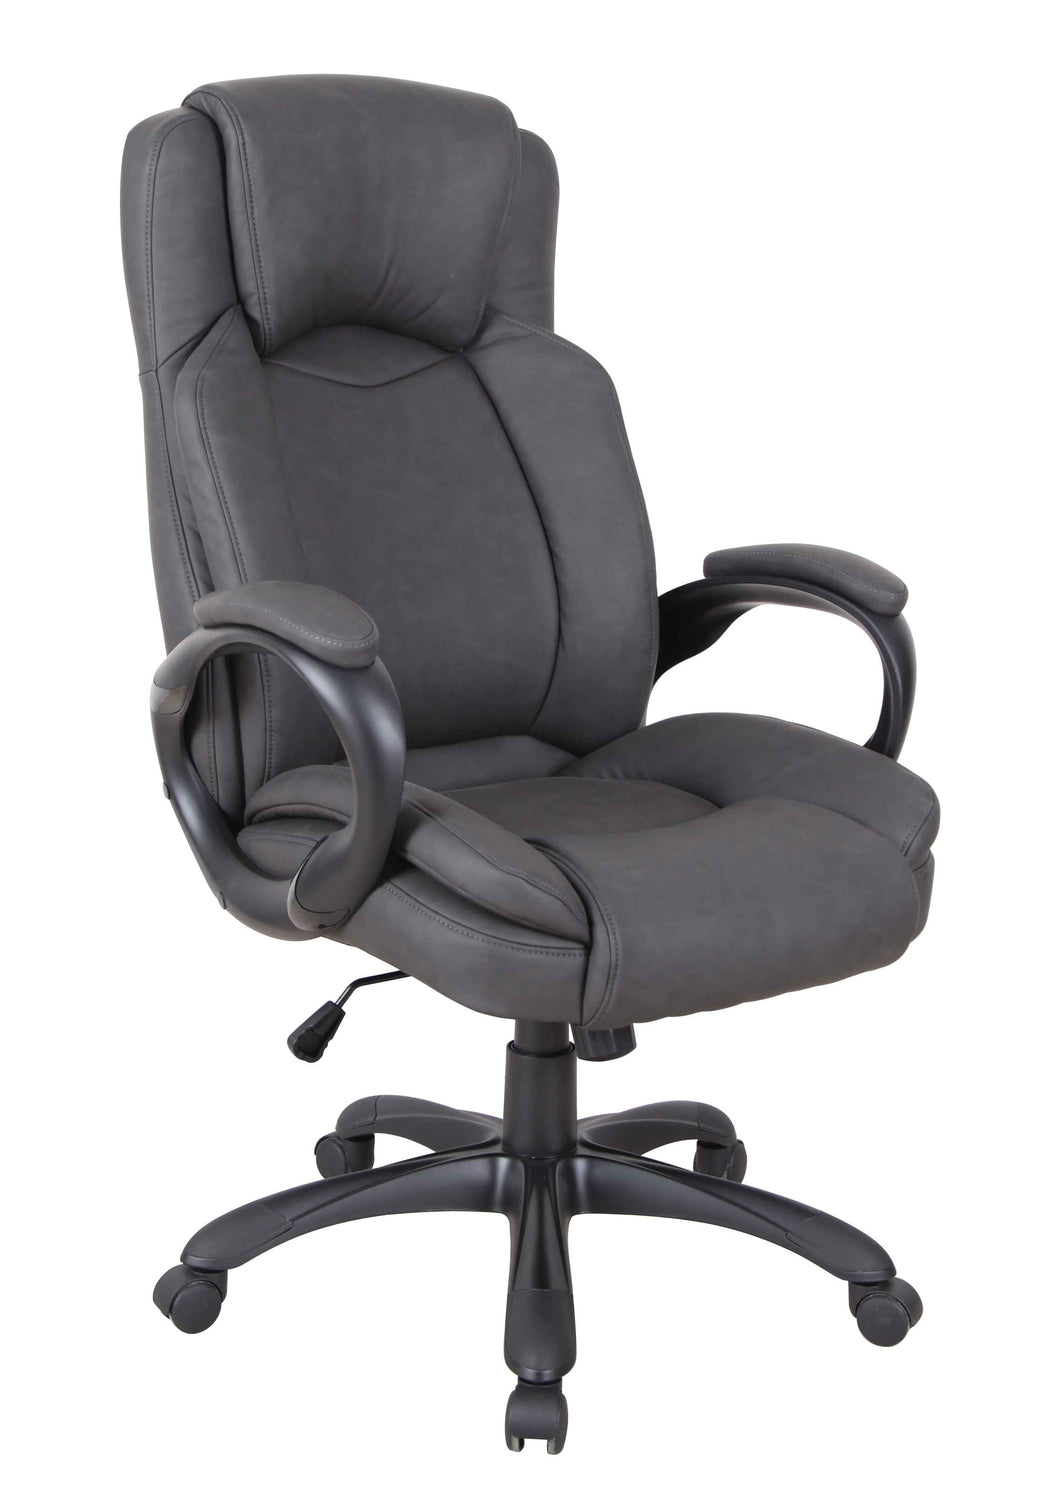 OFFICE SERIES/ 1293H COMPUTER OFFICE CHAIR (GREY)